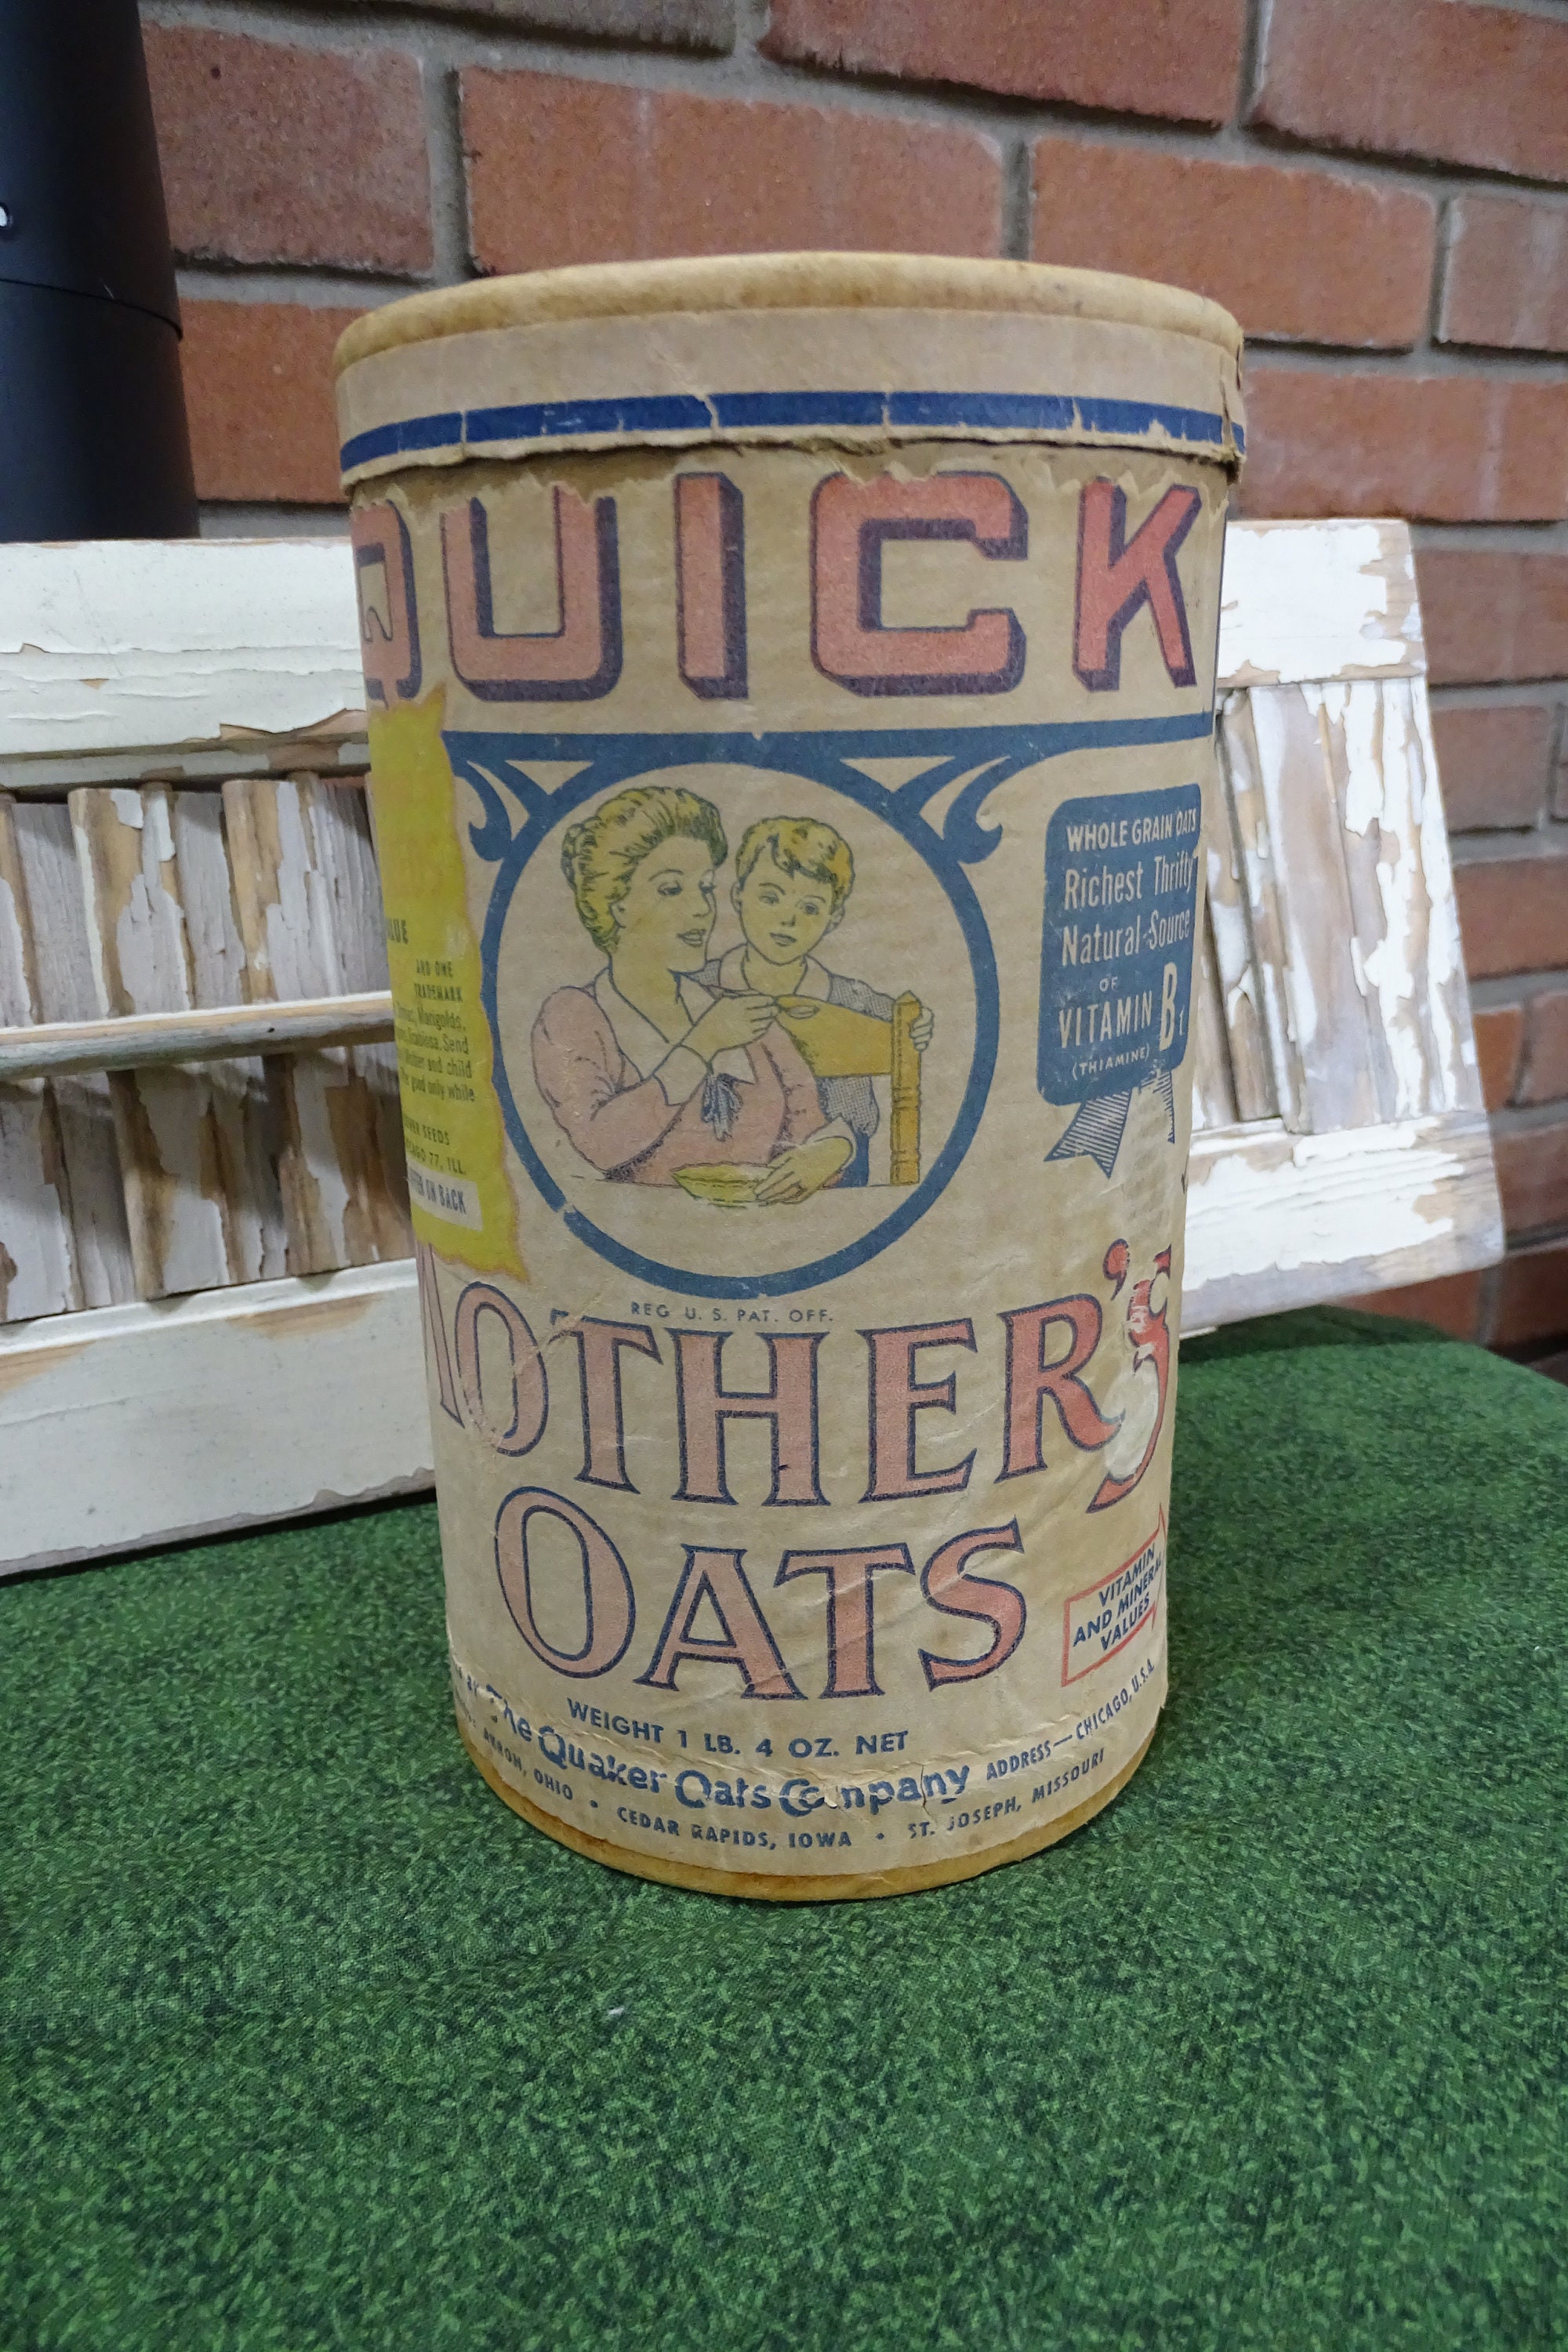 Vintage Quick Quaker Oats Cardboard Collectible Oatmeal Container *EMPTY*